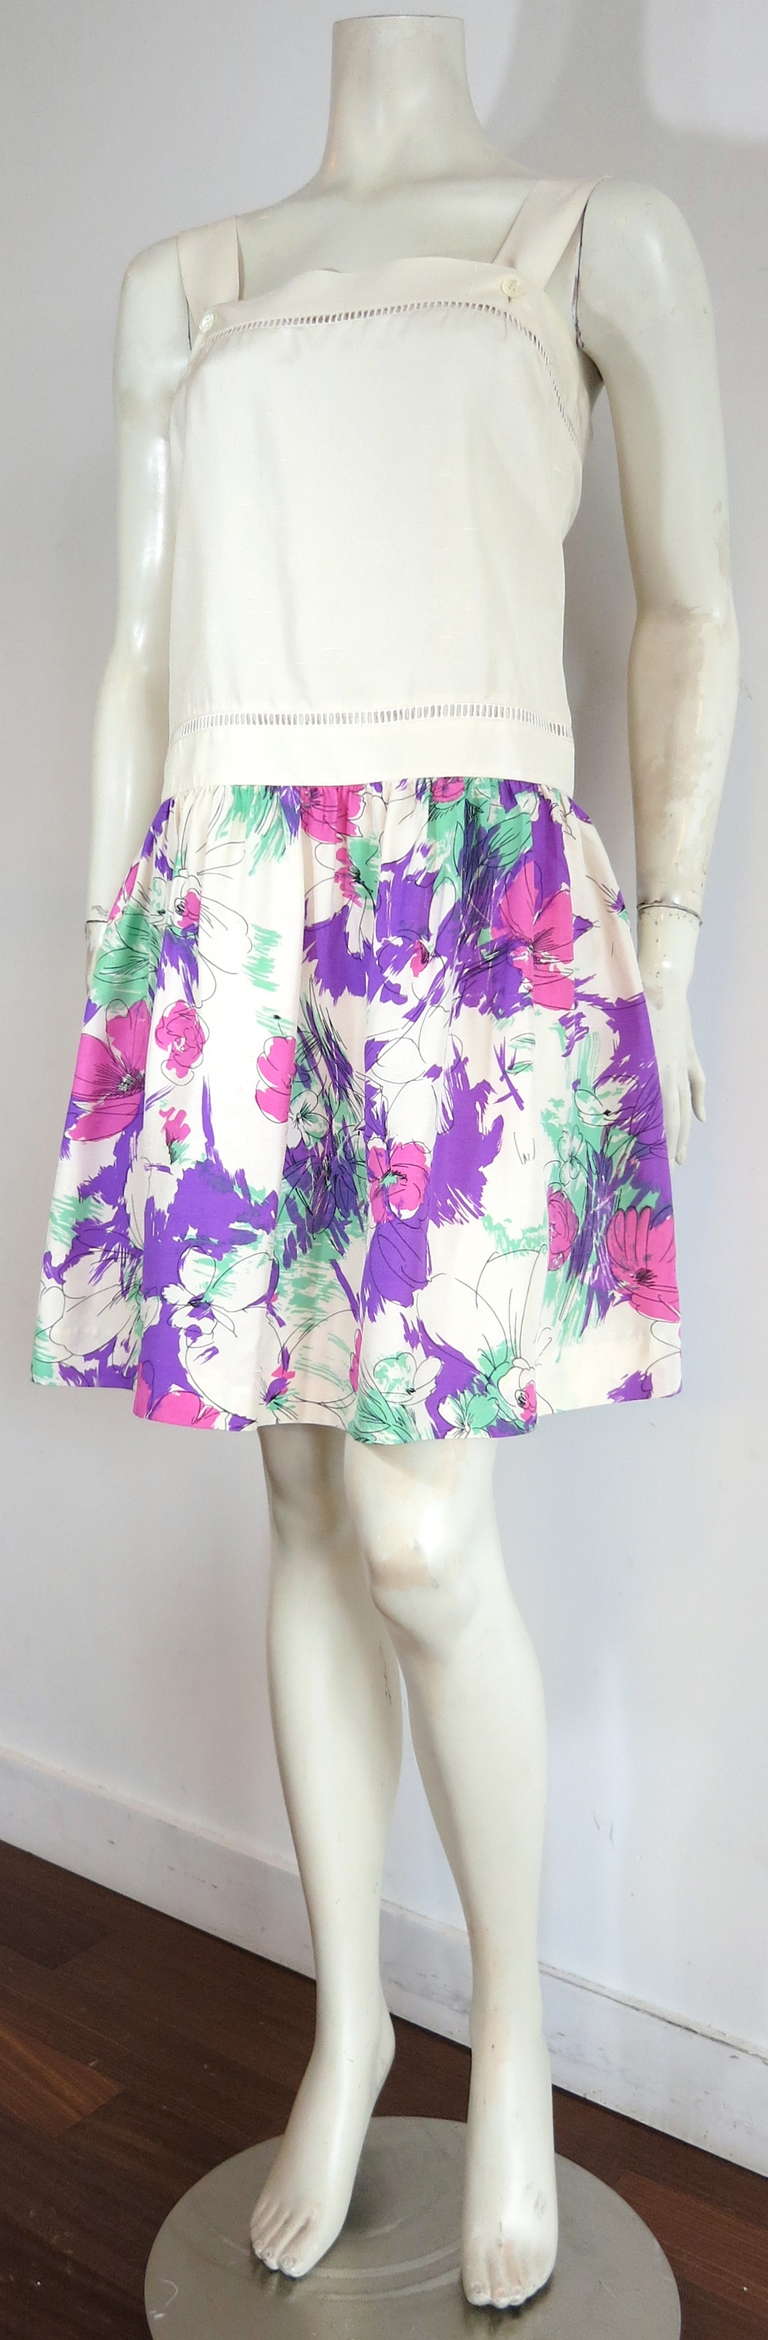 Excellent condition CELINE PARIS Silk floral dress.

This lovely dress was designed by the house of Celine in France during the 1980's.

The top of the dress is made of ivory/lt. creme color silk Shantung weave fabric , and features embroidered